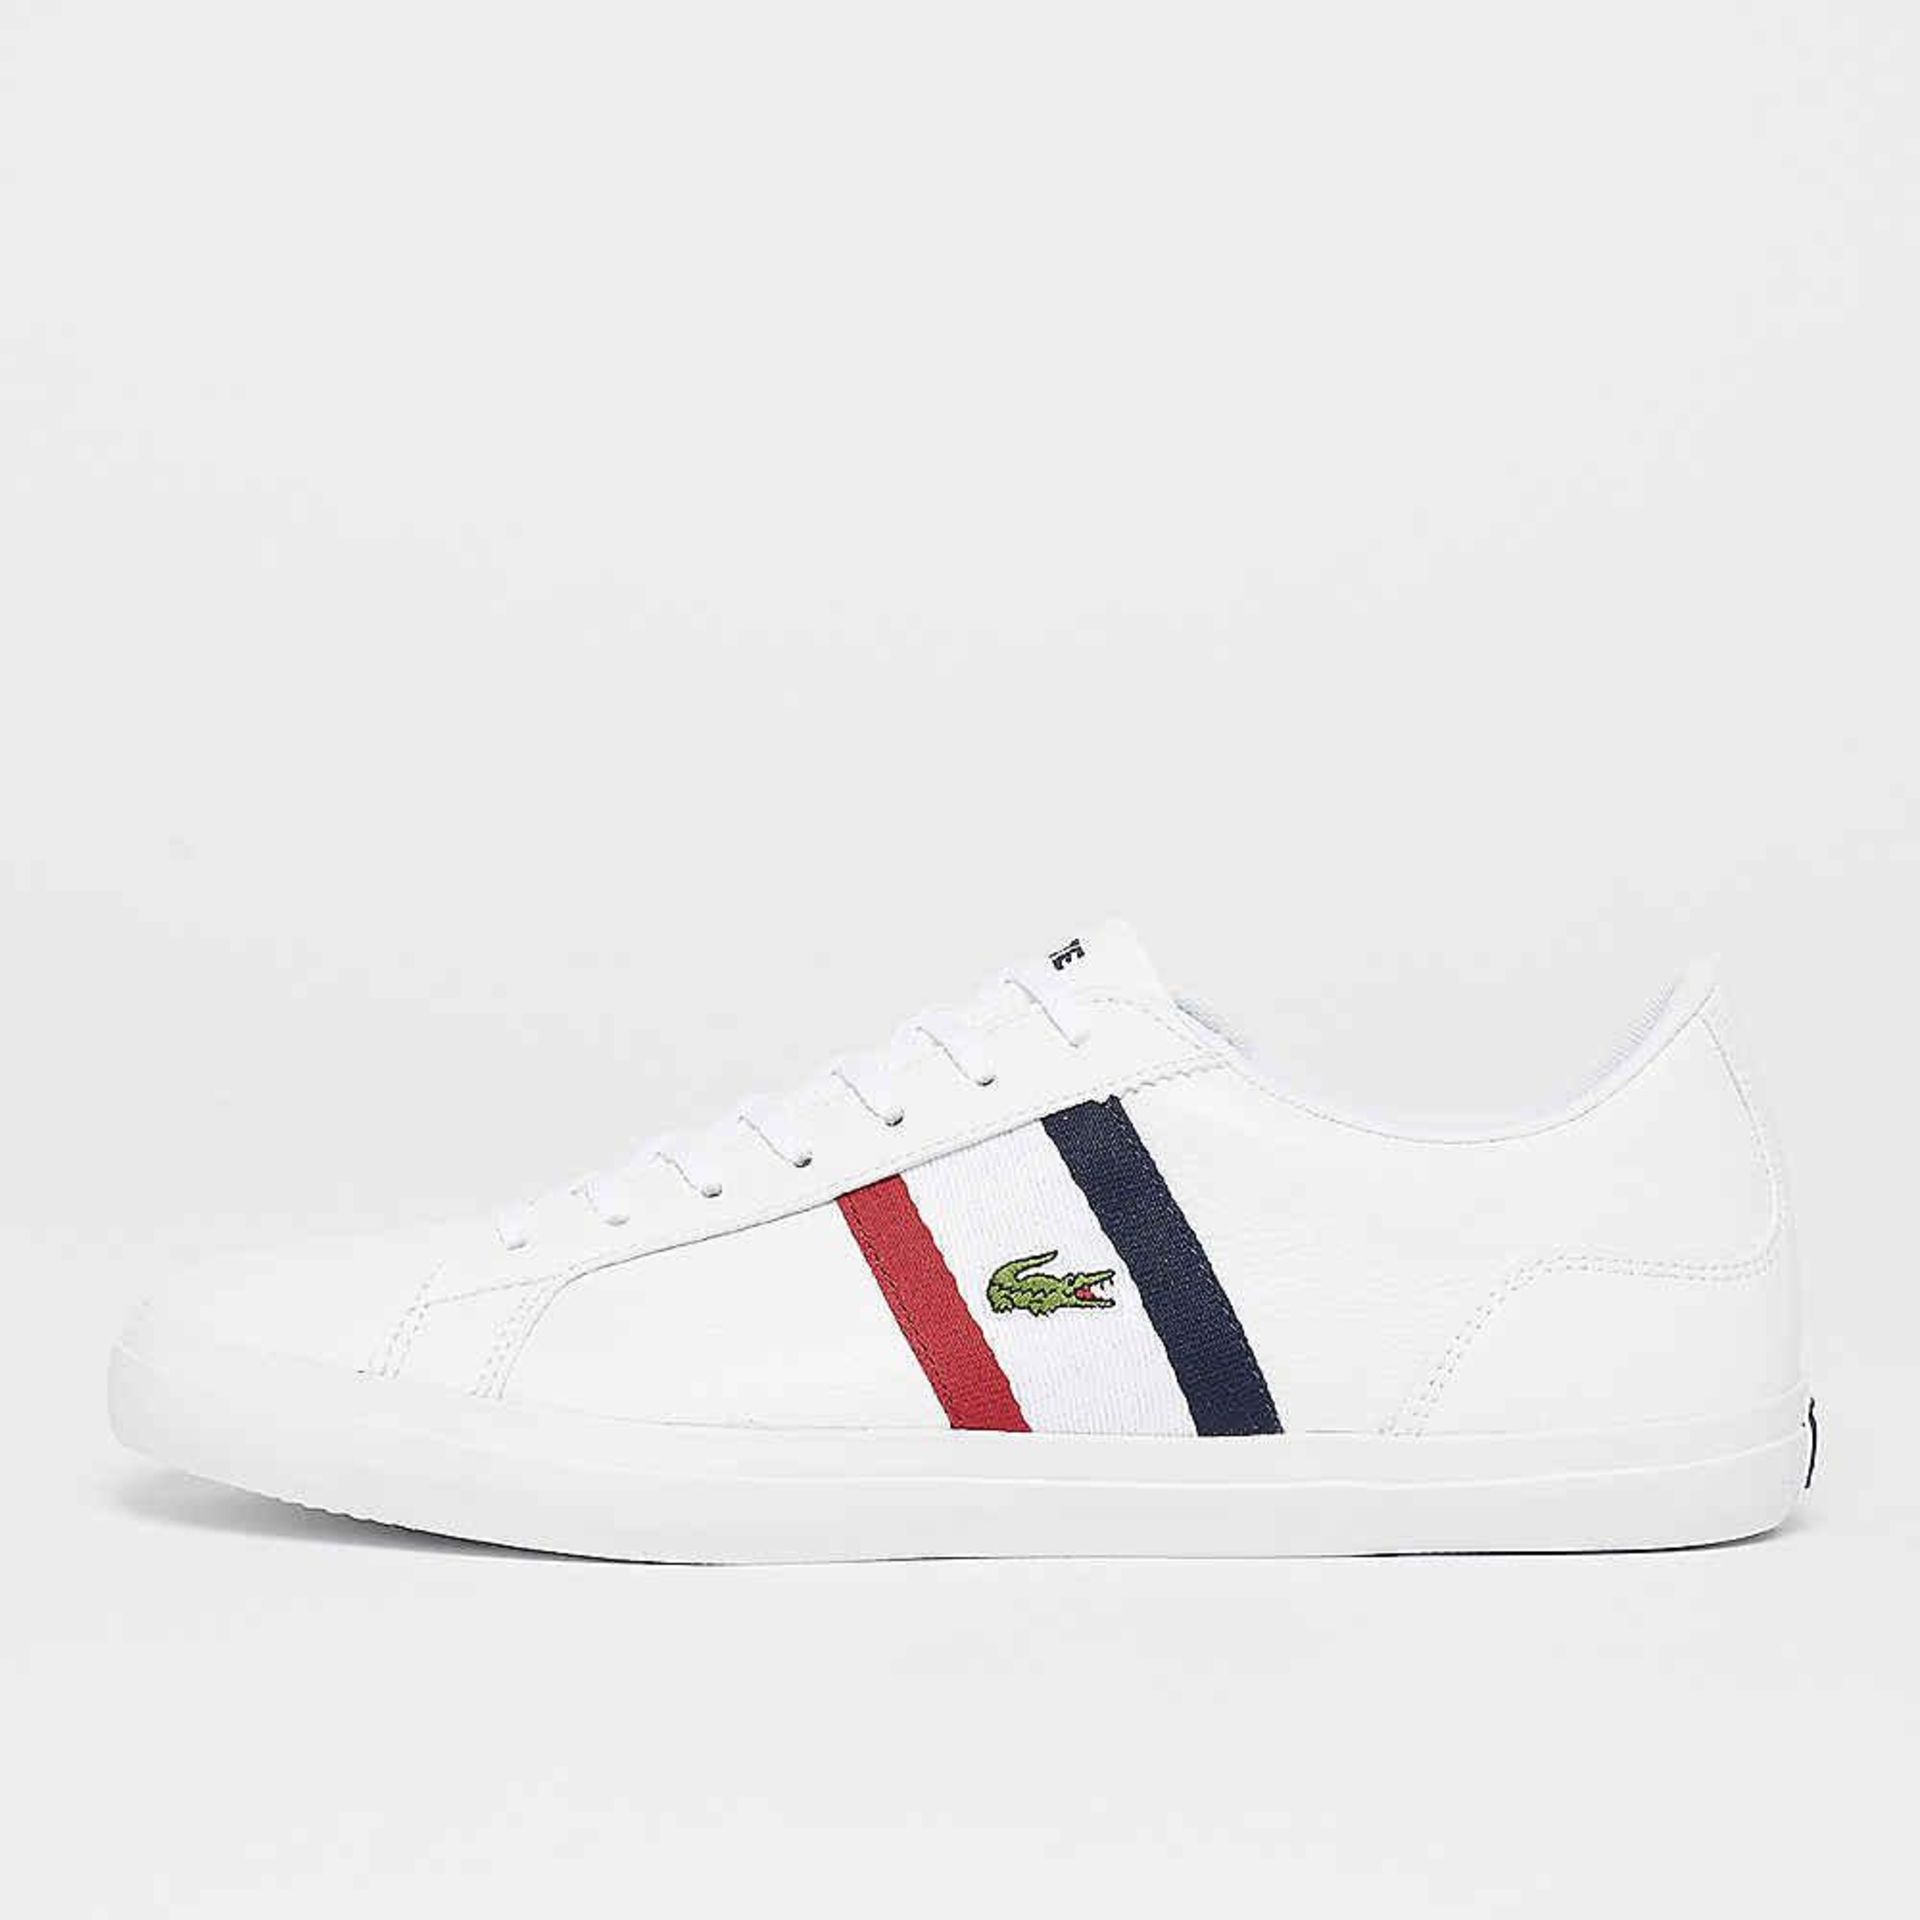 + VAT Brand New Lacoste Trainers UK Size 6 - White Red Navy - Leather and Synthetic - EU Size 39.